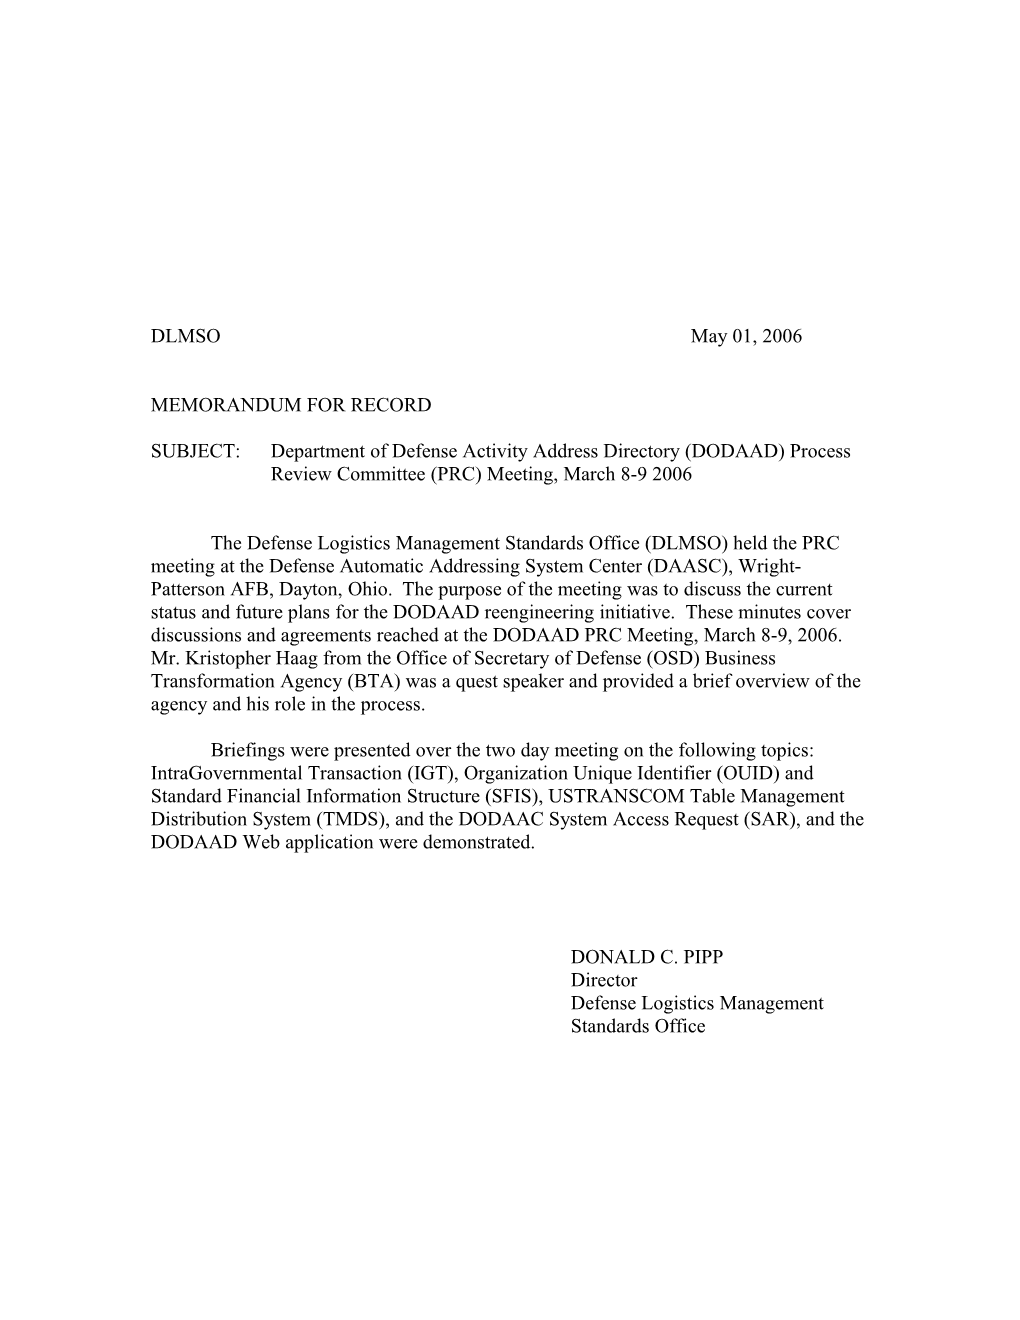 SUBJECT: Department of Defense Activity Address Directory (DODAAD) Process Review Committee